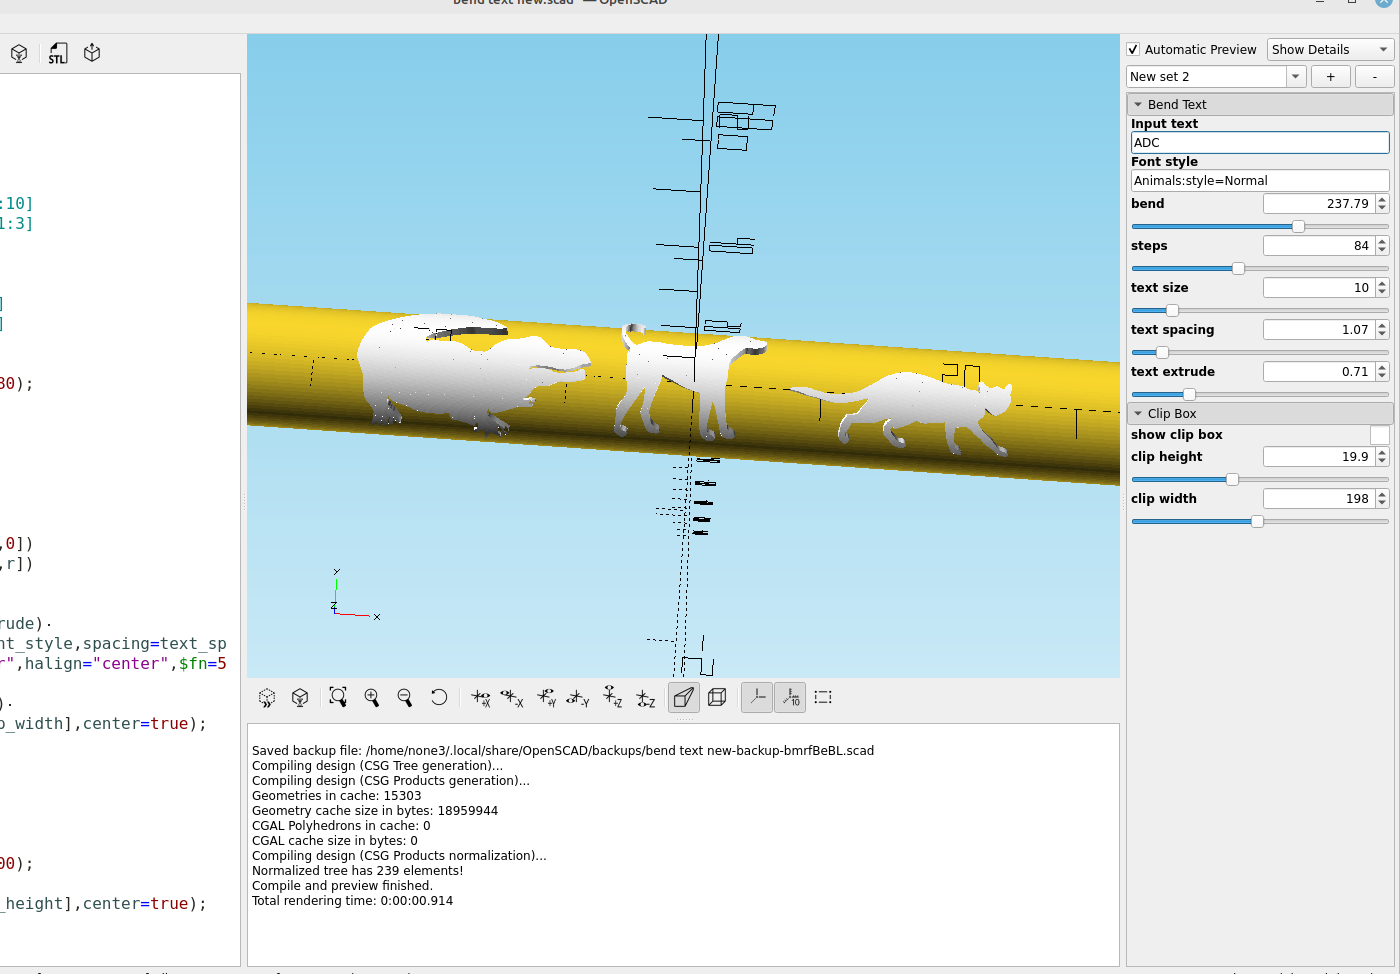 3D part design with OpenSCAD #82: bending text around a cylinder.